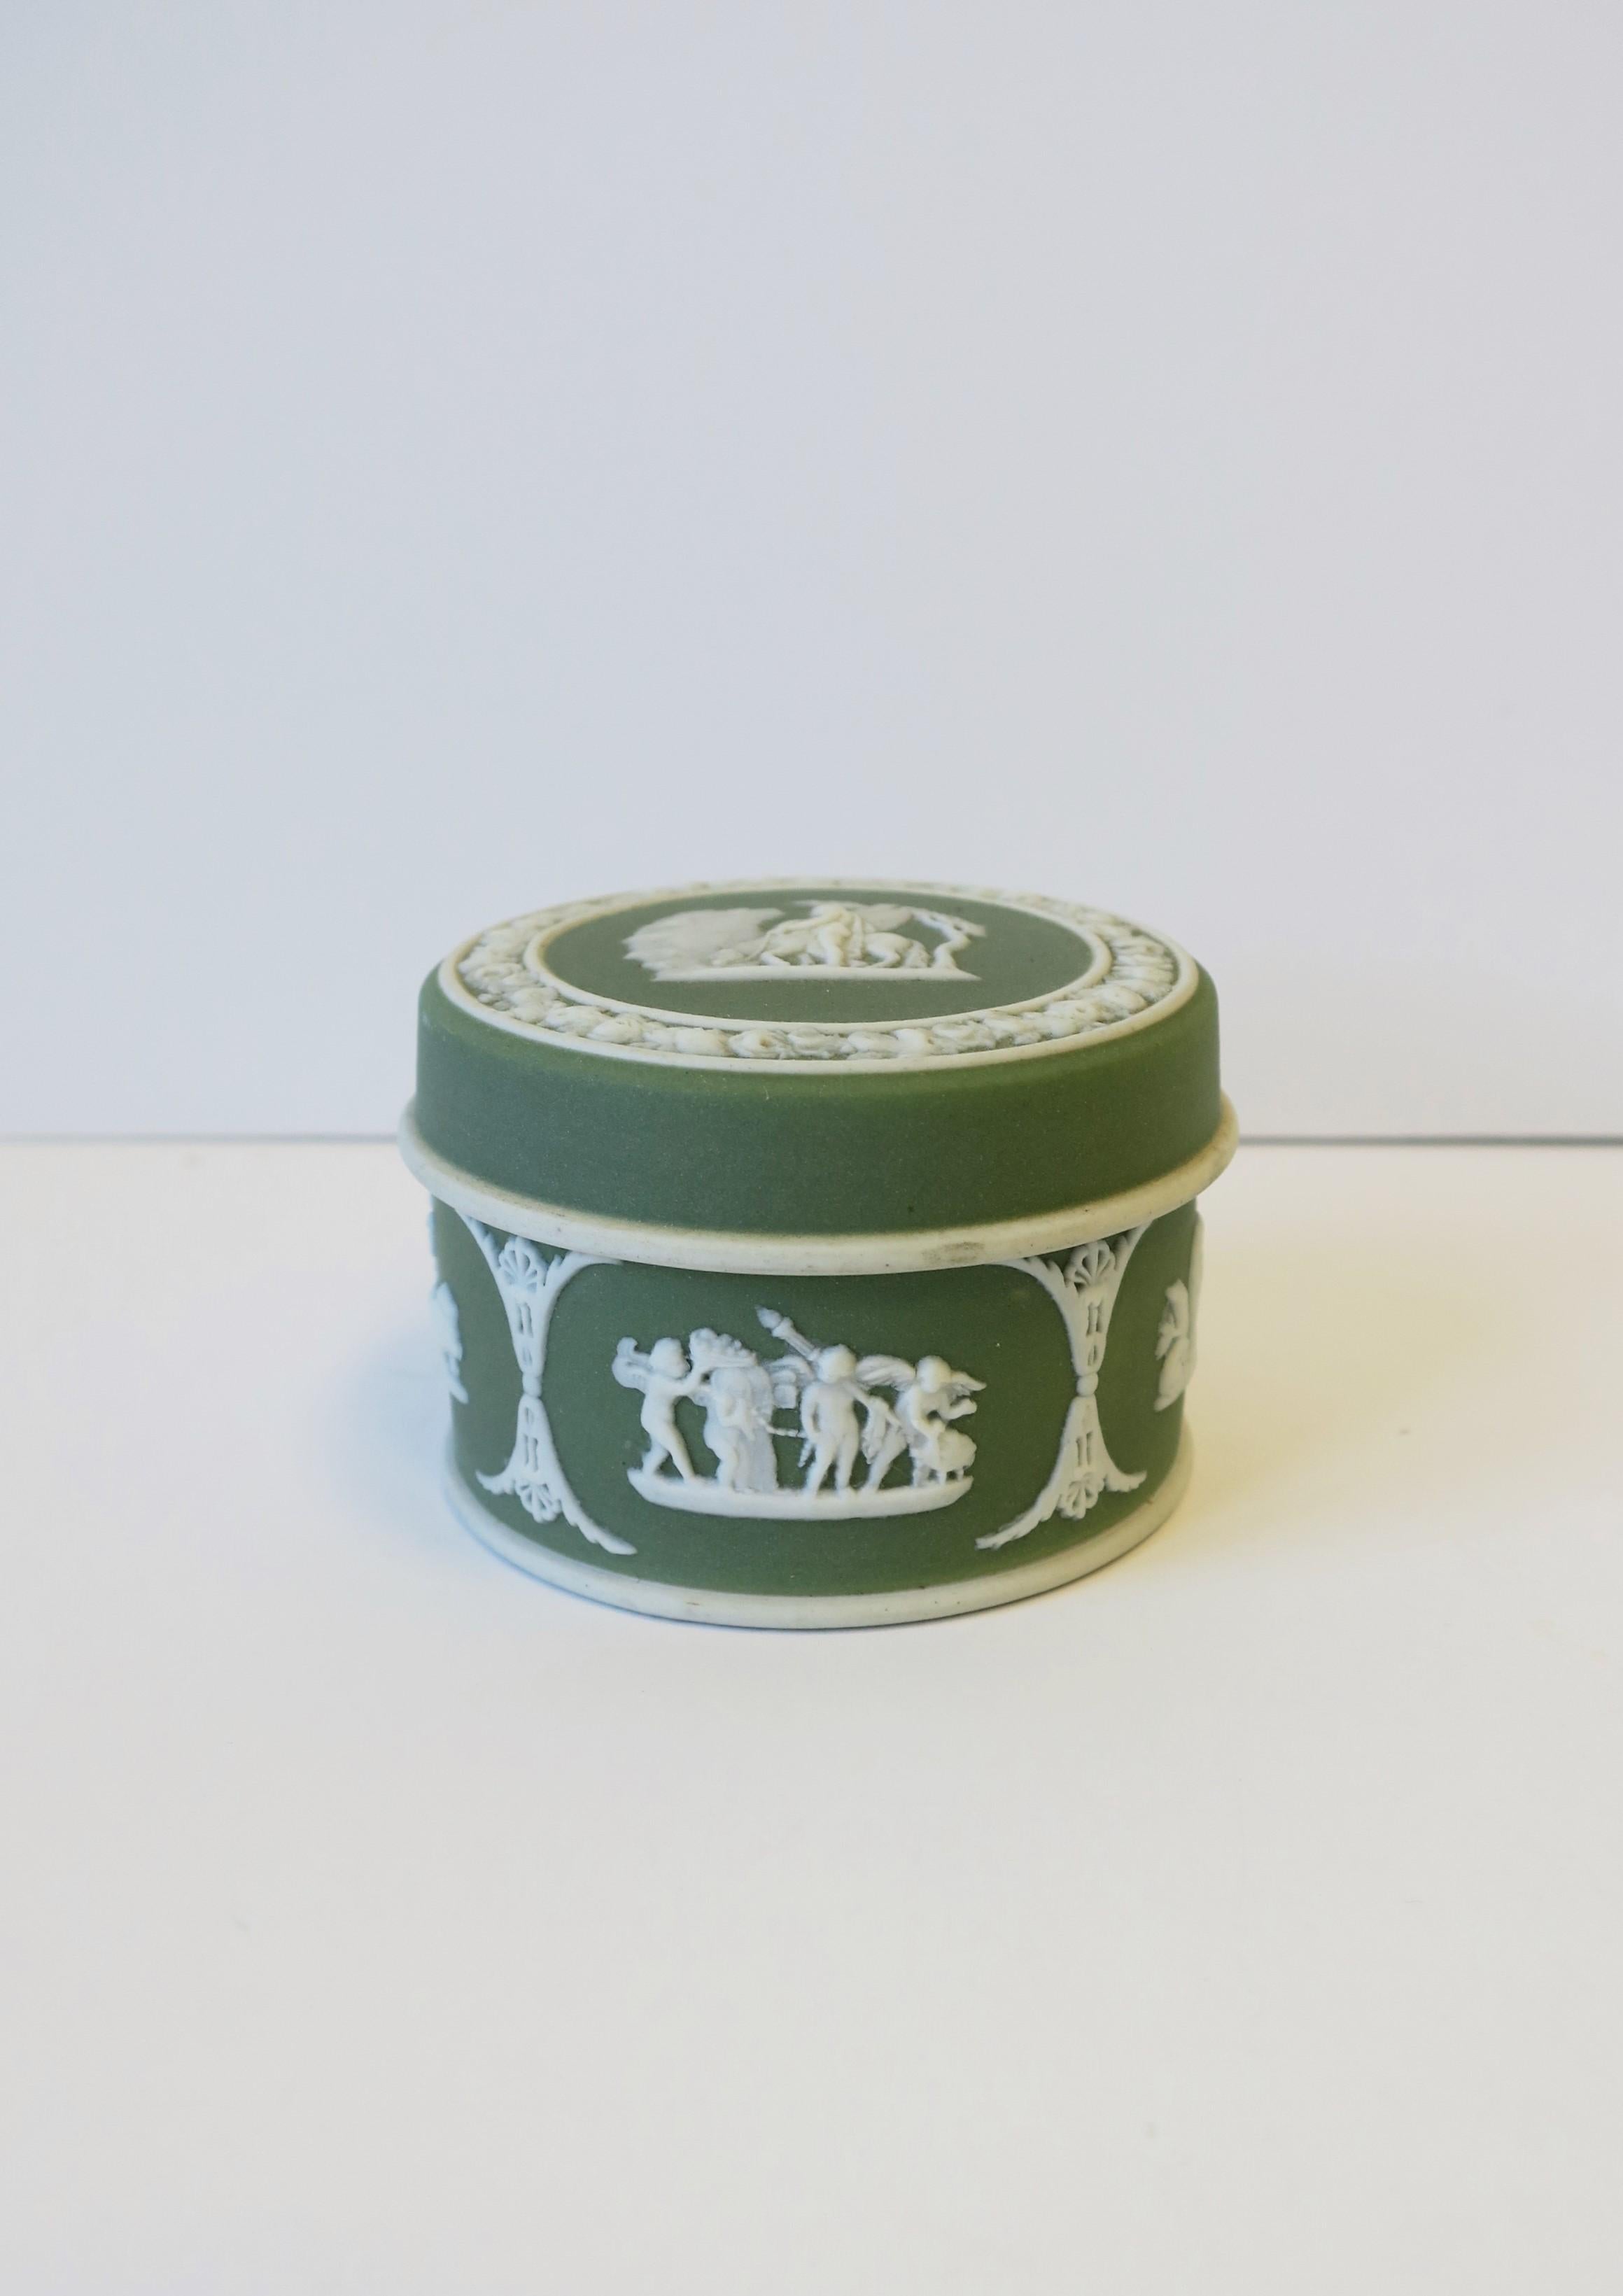 A beautiful English green and white Wedgwood Jasperware round box in the Neoclassical style, circa late-19th century, England. Lid features detailed raised relief with equine horse with wings and male rider. Other beautiful Neoclassical raised